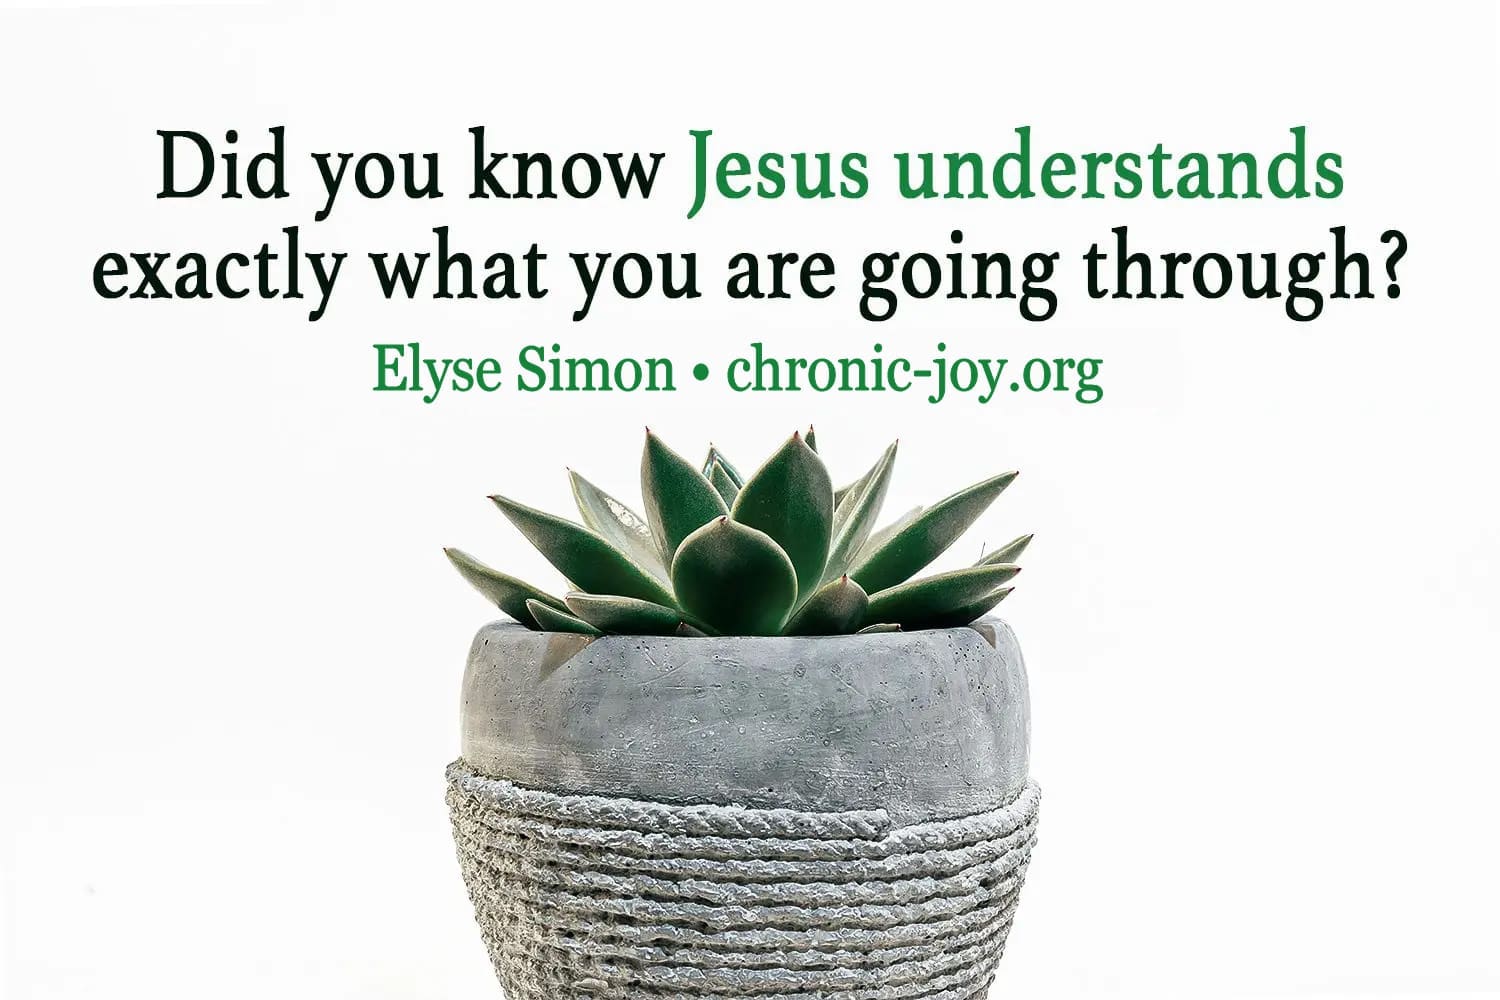 "Did you know Jesus understands exactly what you are going through?" Elyse Simon